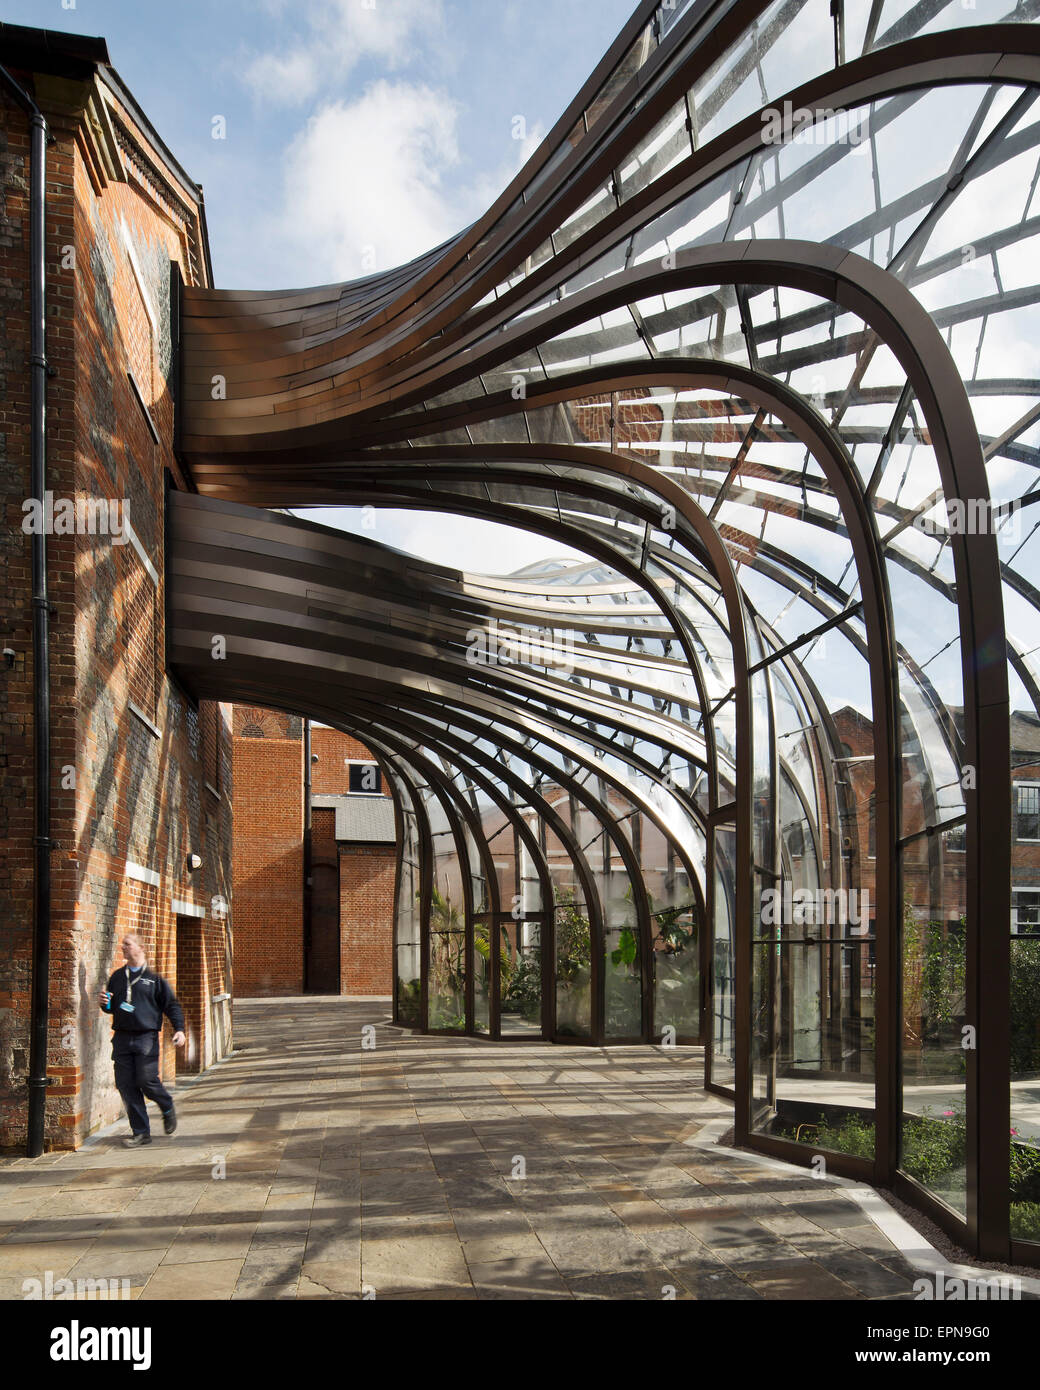 View of Glass houses. Bombay Sapphire Distillery, Laverstoke, United ...